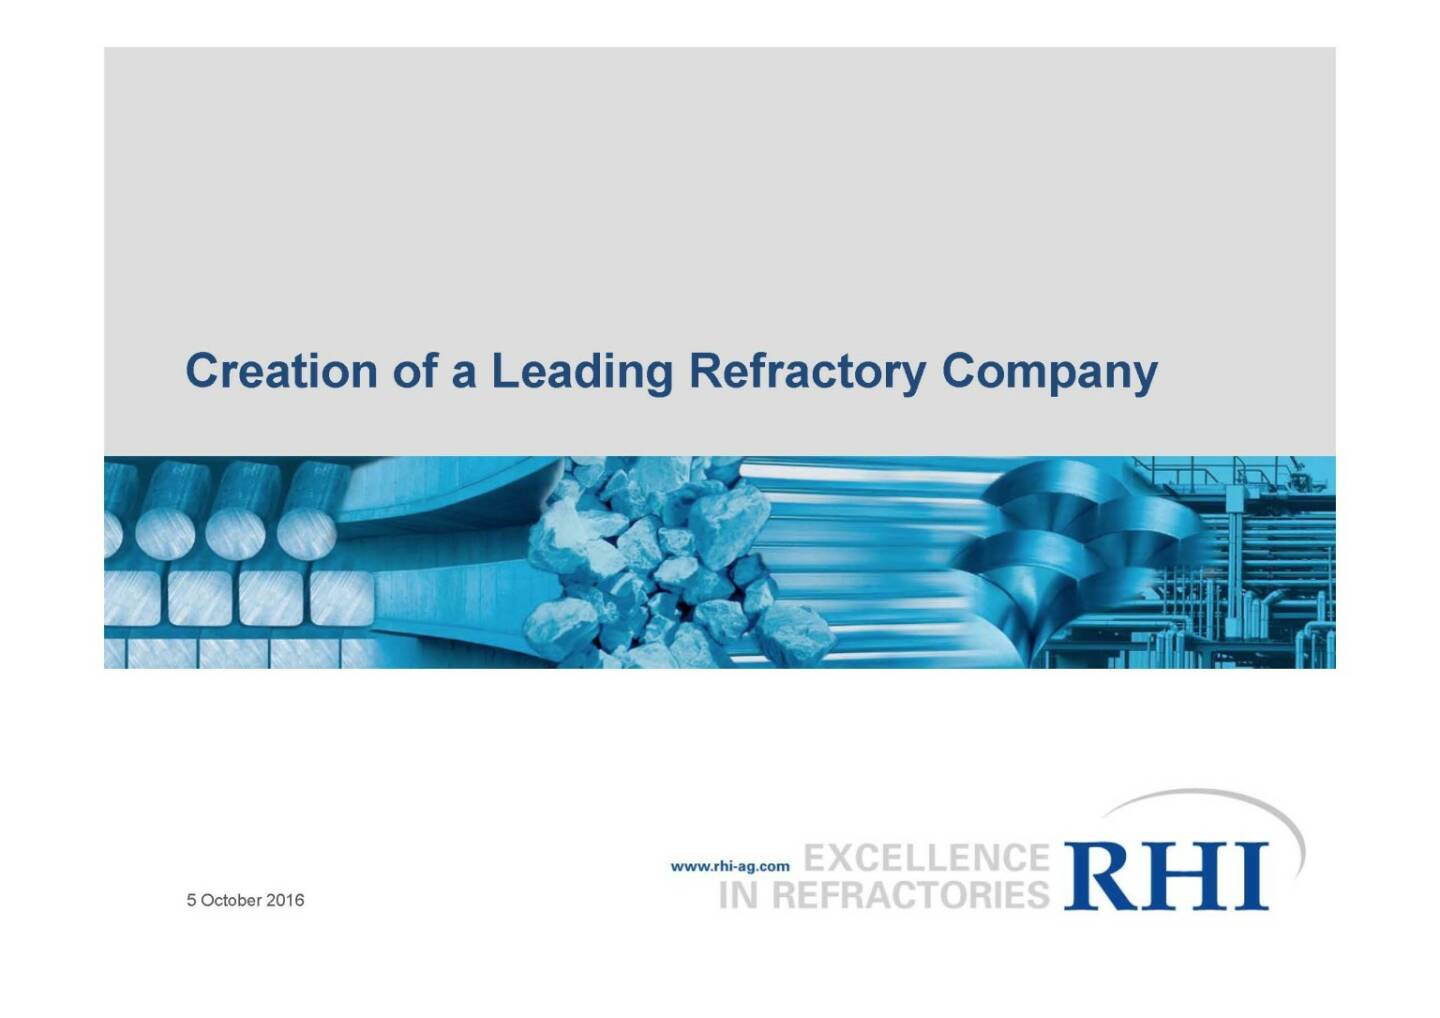 RHI - Creation of a Leading Refractory Company